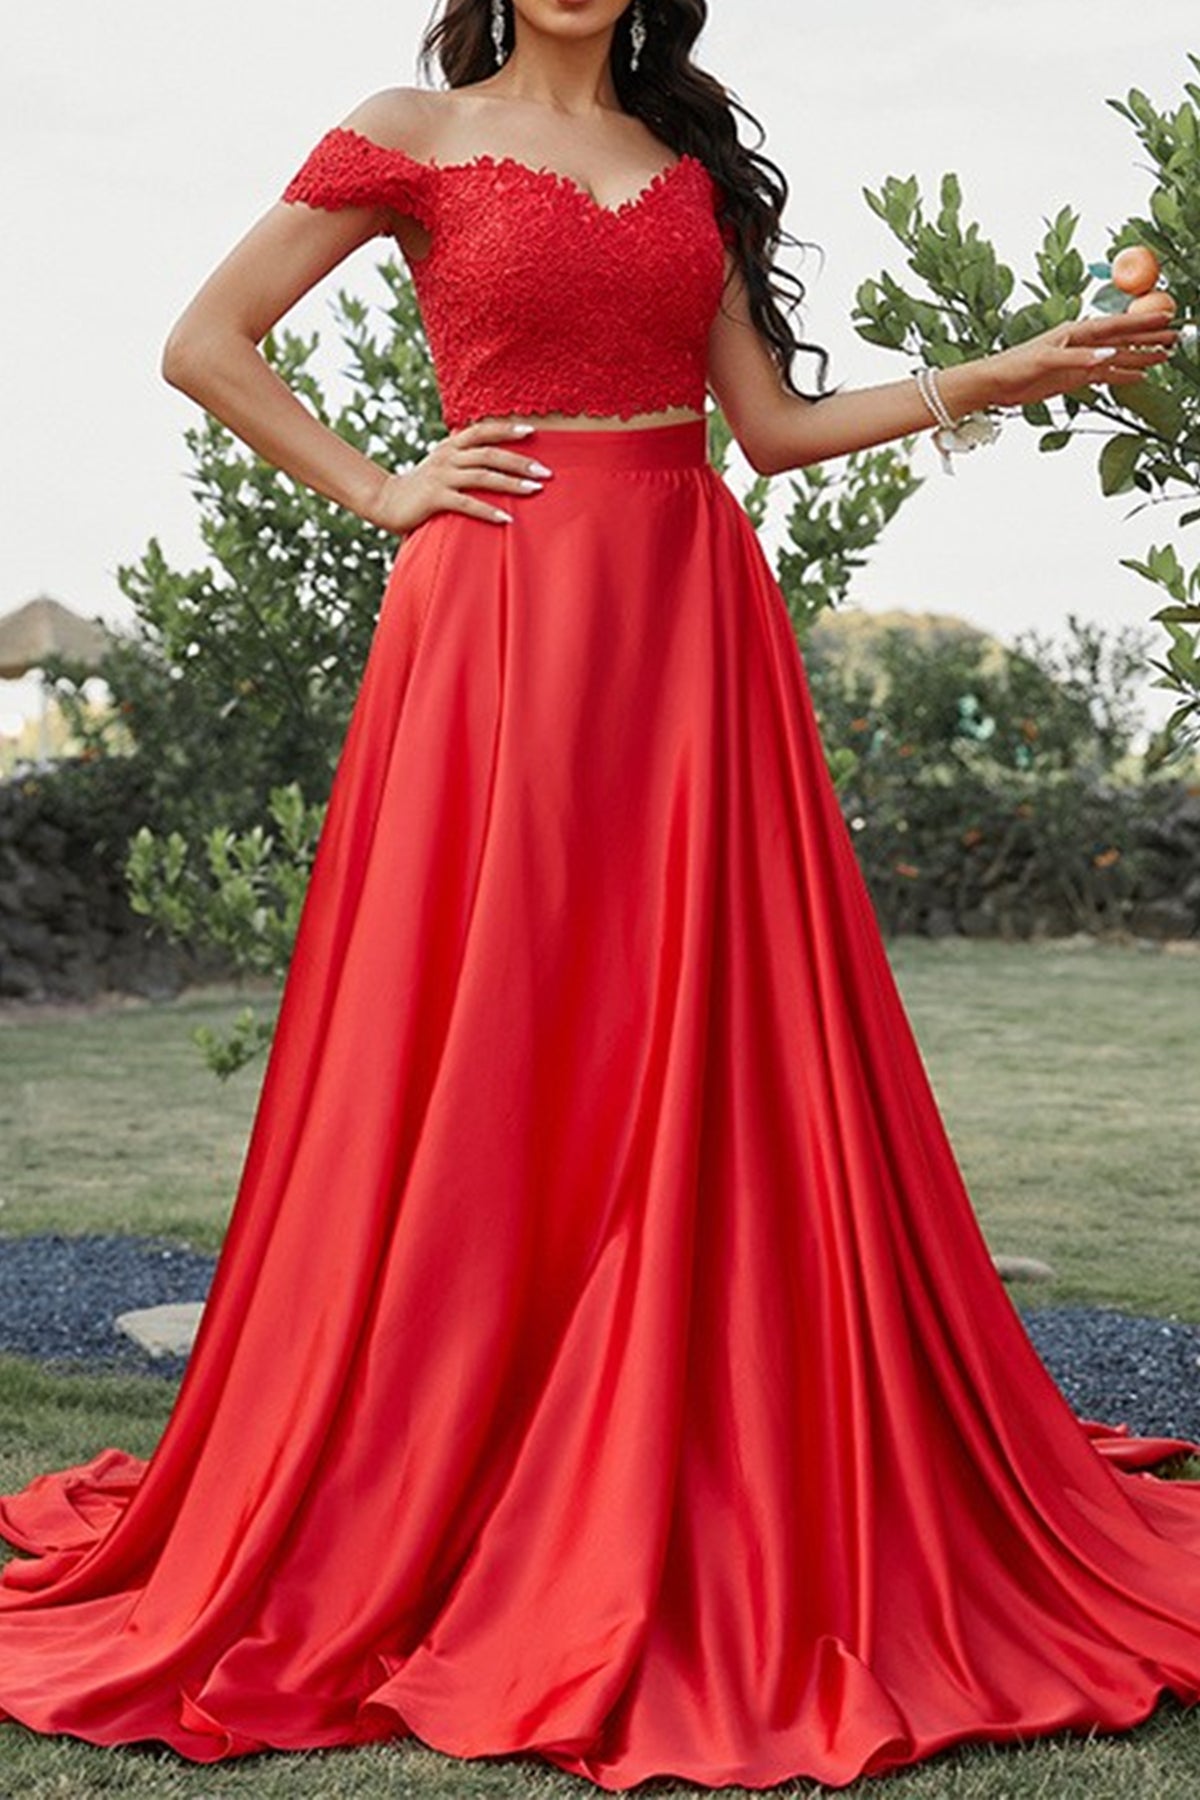 Lady in Red - STYLETHEGIRL | Red lace dress, Nice dresses, Dress